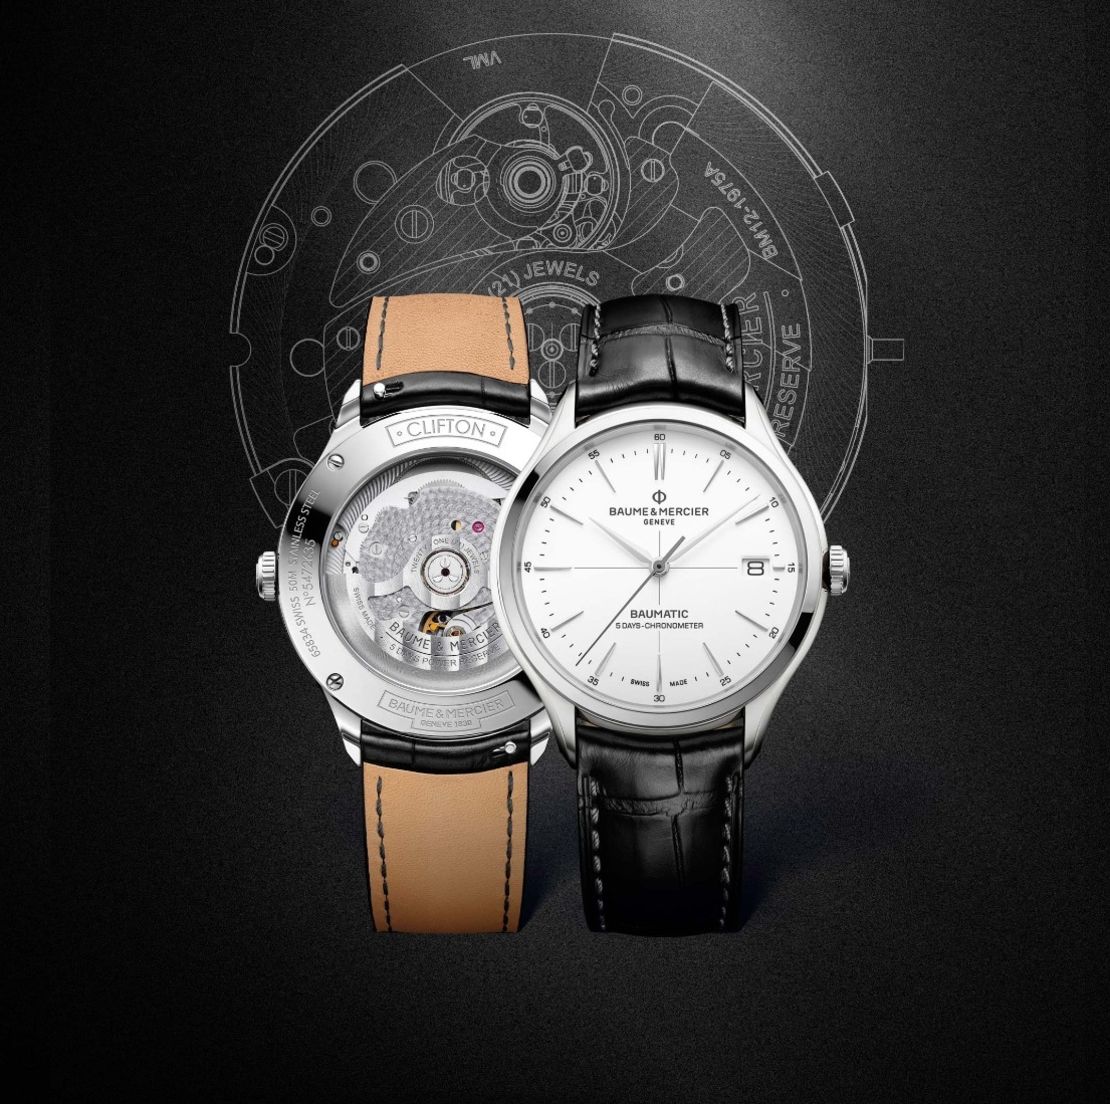 Introducing Baume: The Latest Entry-Level Watch Brand From